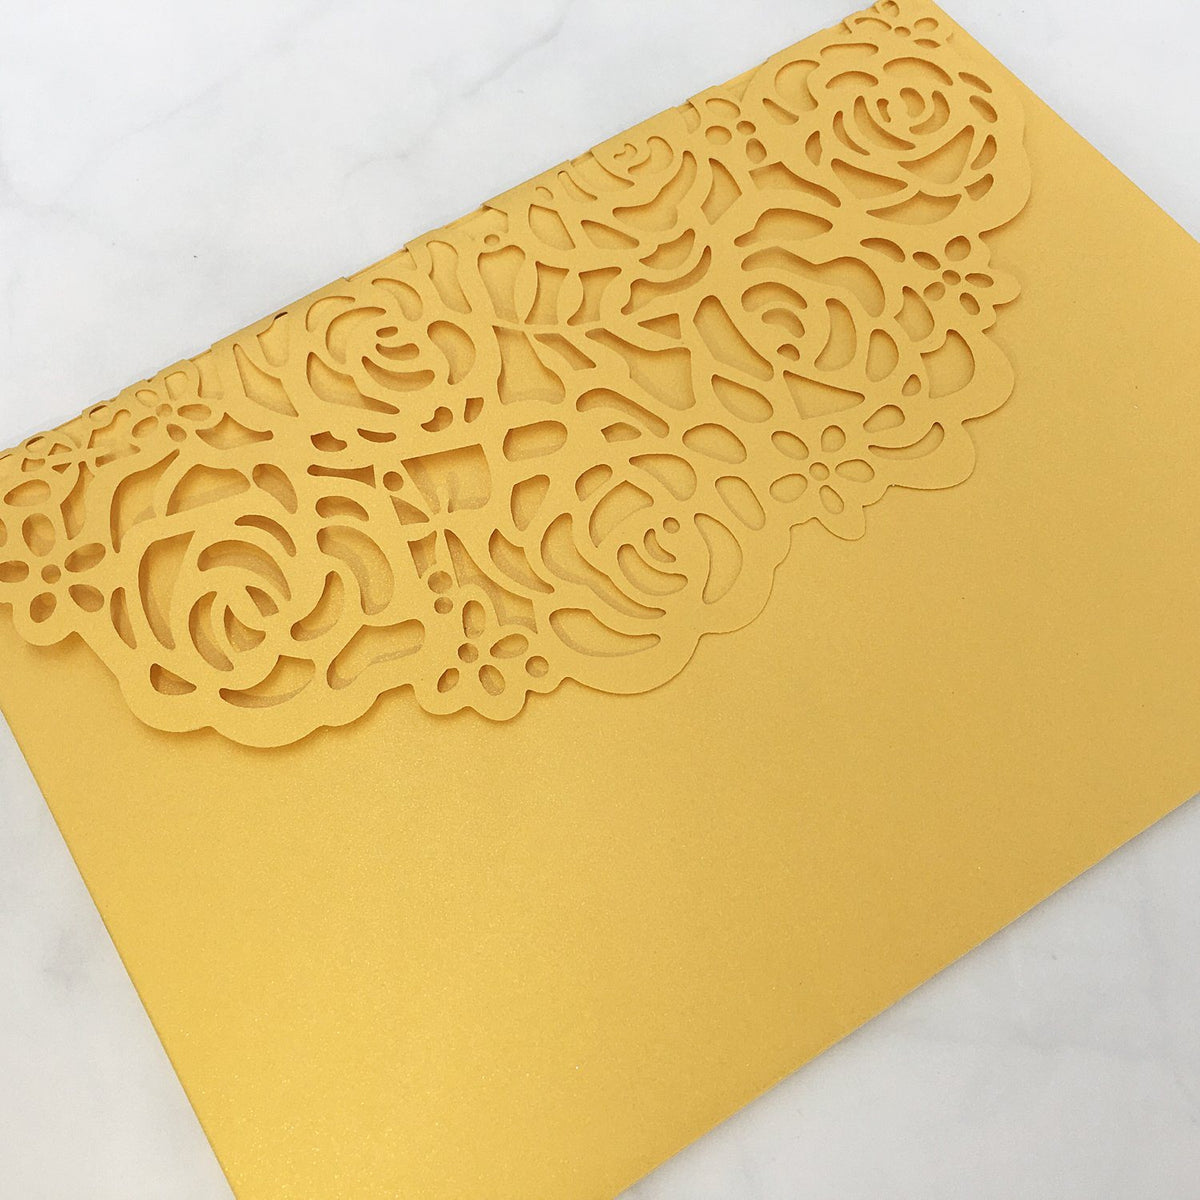 laser-cut-wedding-invitations-yellow-gold-invitations-with-rsvp-cards